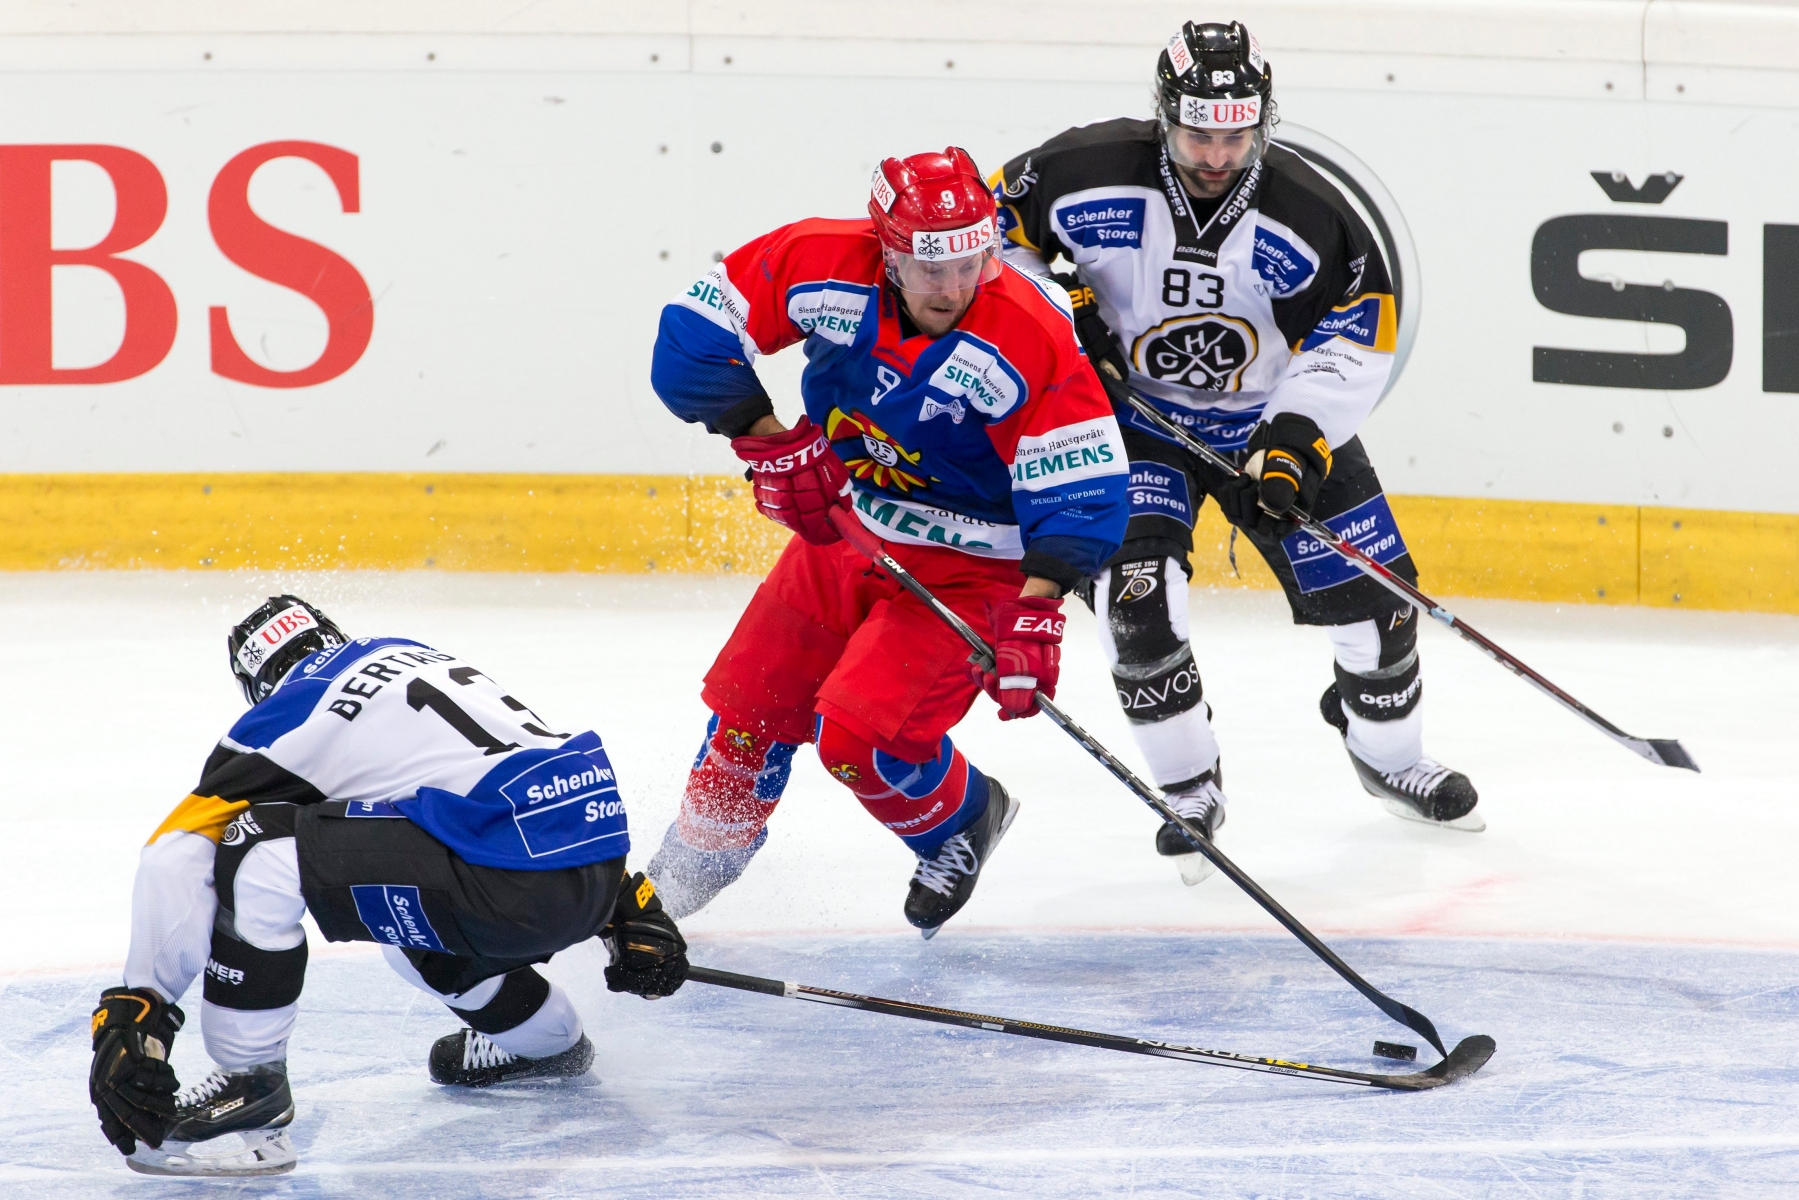 Helsinki's Niklas Hagmann, middle, fight for the puck with Lugano's Alessio Bertaggia, left and Dan Spang, right, during the game between Switzerland's HC Lugano and Finland's Jokerit Helsinki at the 89th Spengler Cup ice hockey tournament in Davos, Switzerland, Monday, December 28, 2015. (KEYSTONE/Pascal Muller) EISHOCKEY SPENGLER CUP 2015 LUGANO HELSINKI